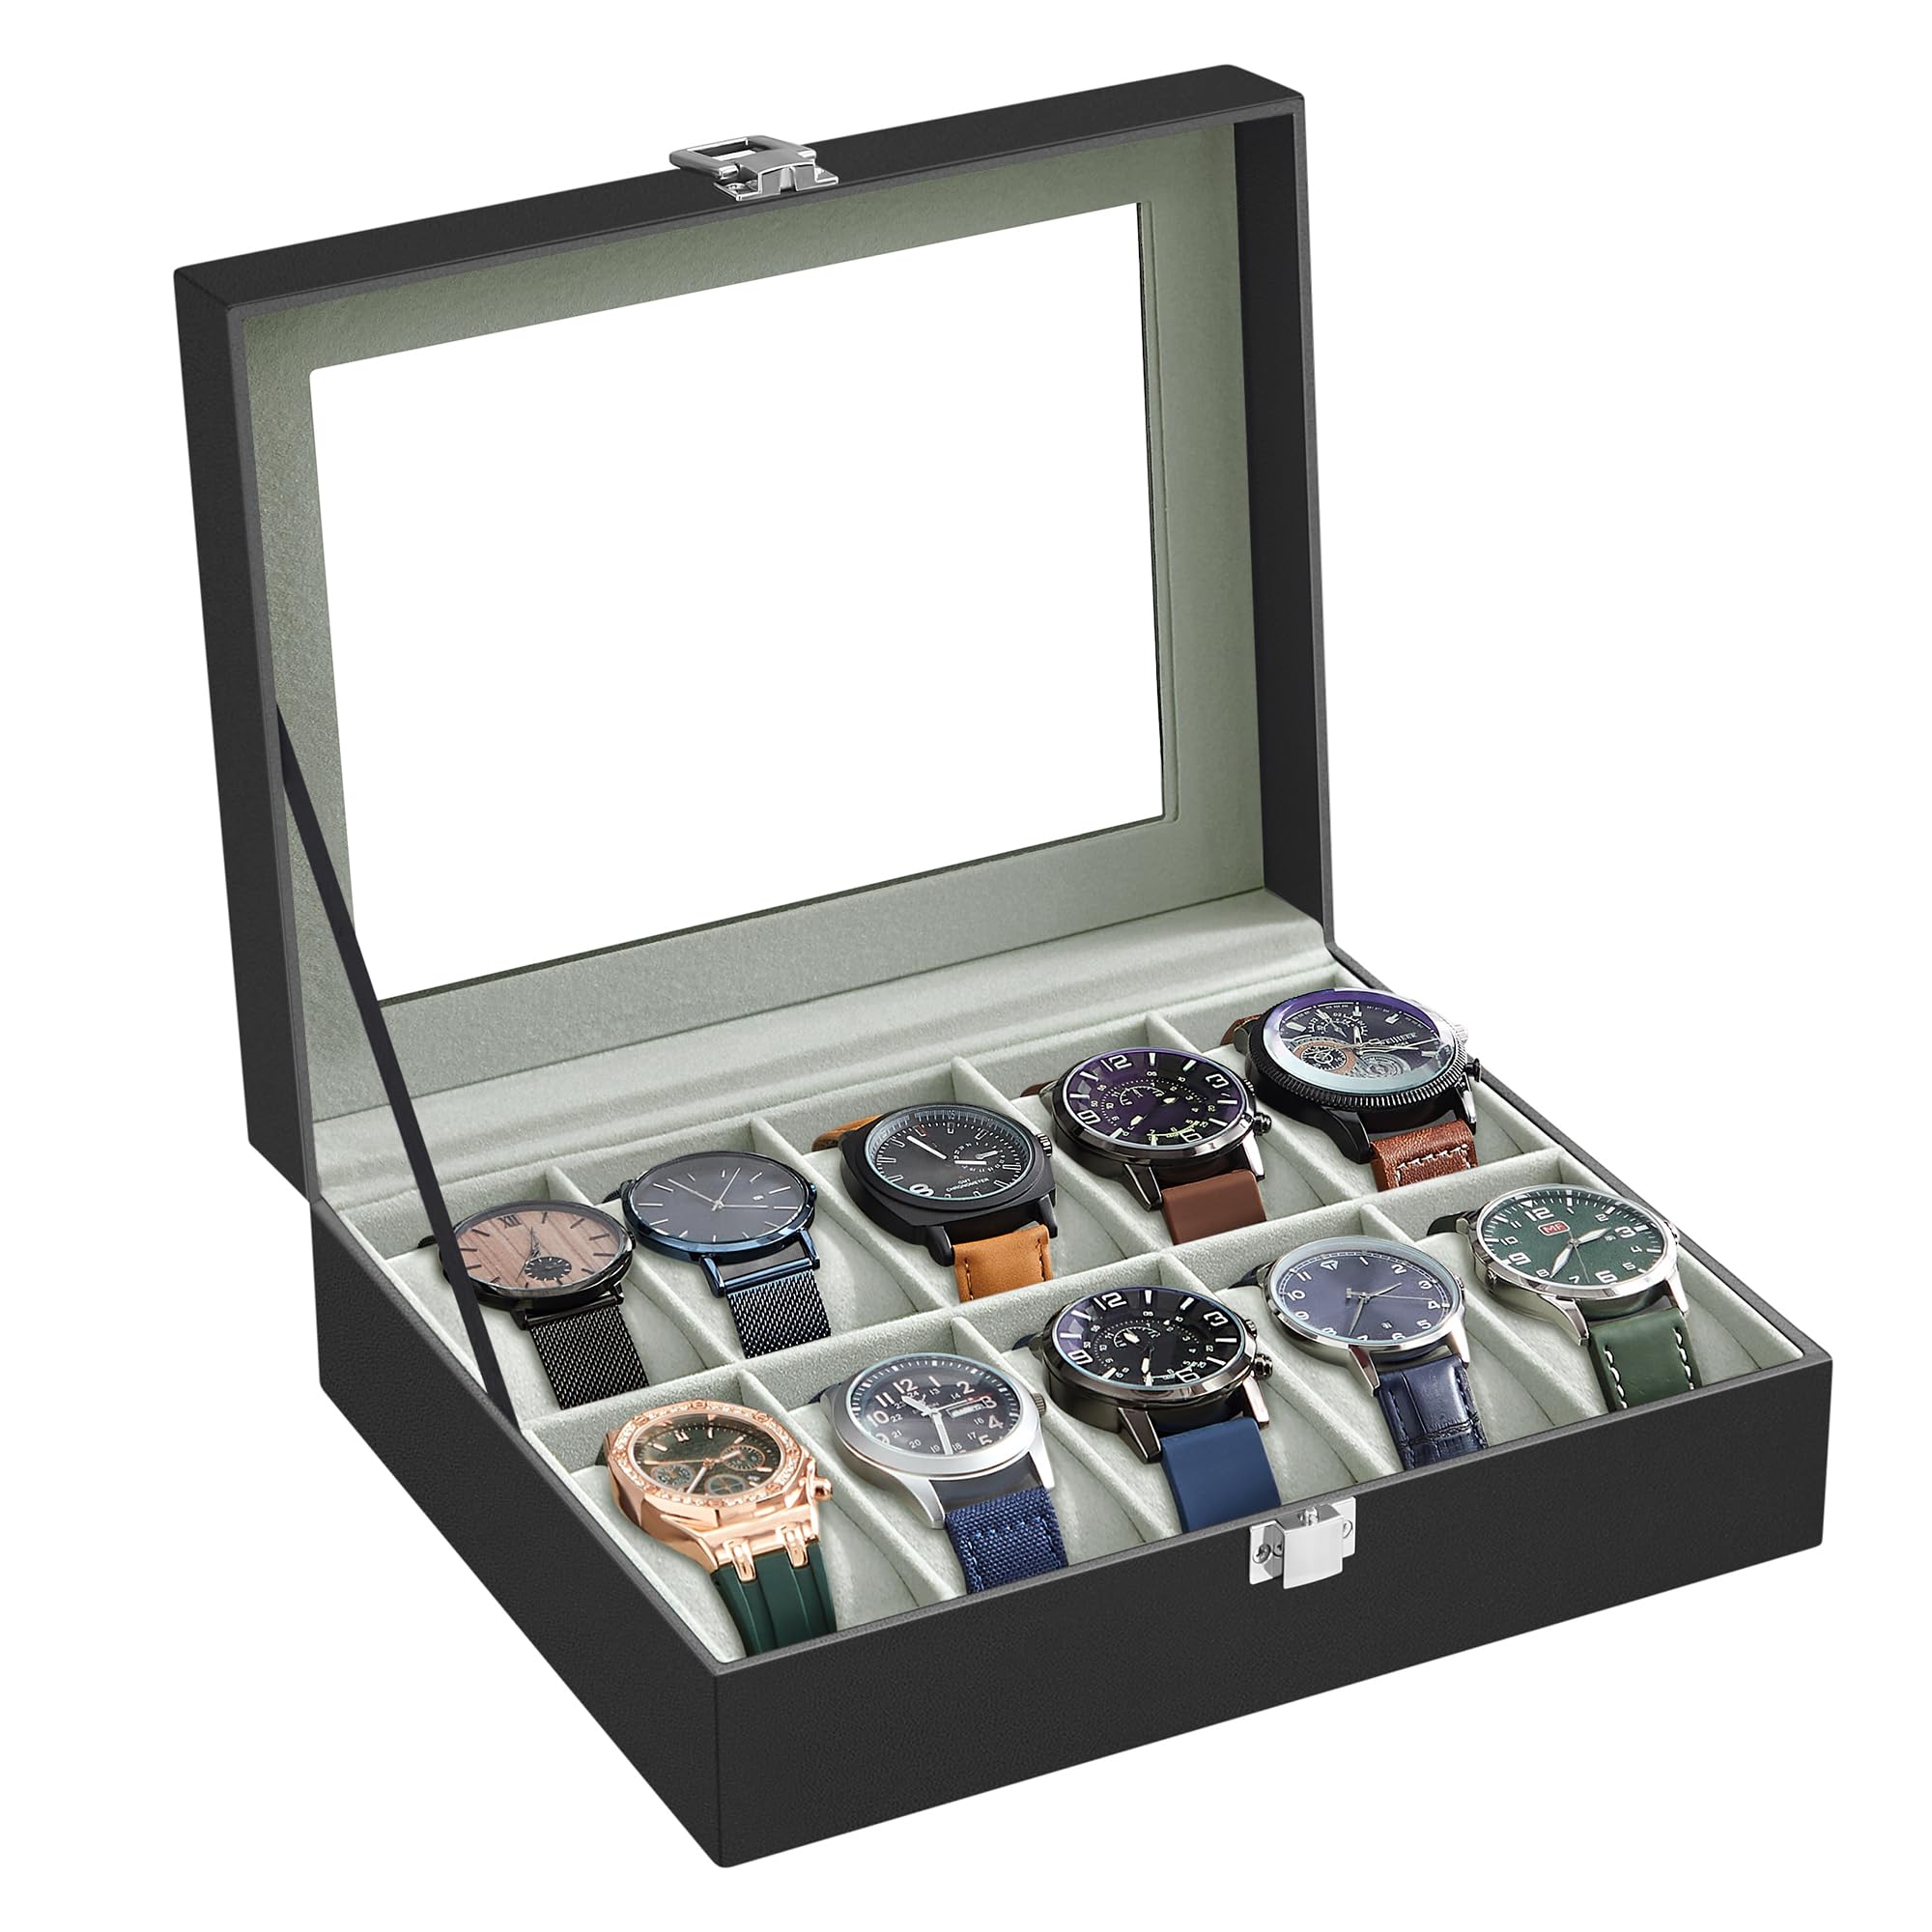 SONGMICS Watch Box, 10-Slot Watch Case with Large Glass Lid, Removable Watch Pillows, Watch Box Organizer, Gift for Loved Ones, Black Synthetic Leather, Gray Lining UJWB010BK